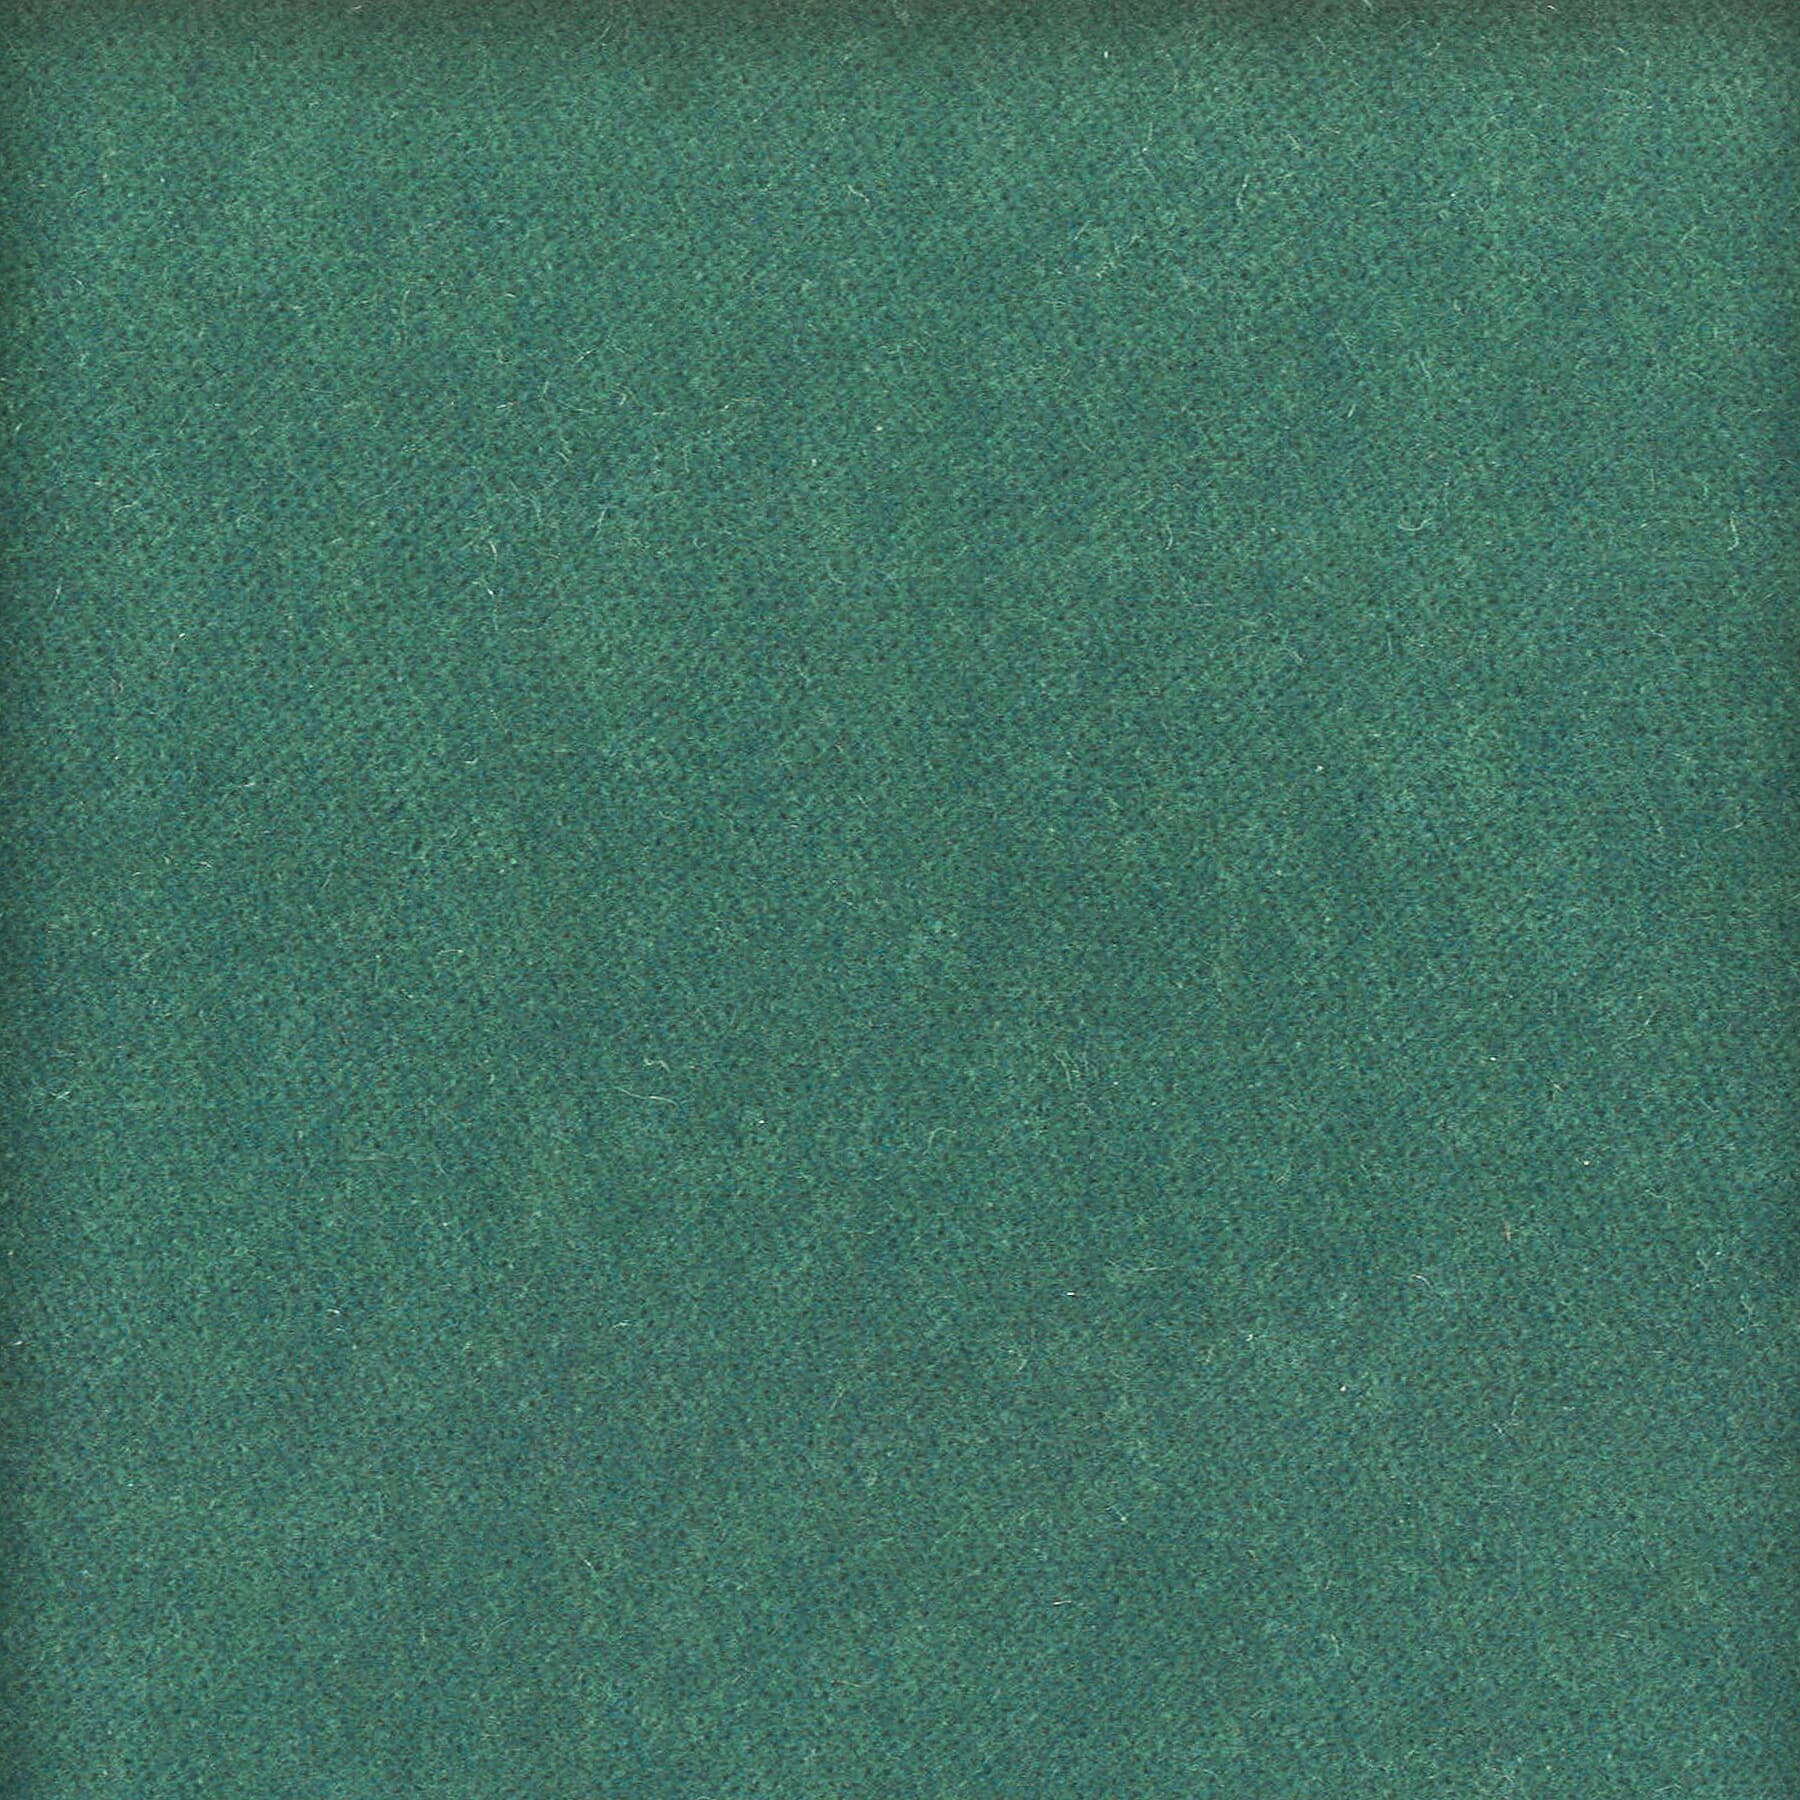 Moore 7 Teal by Stout Fabric